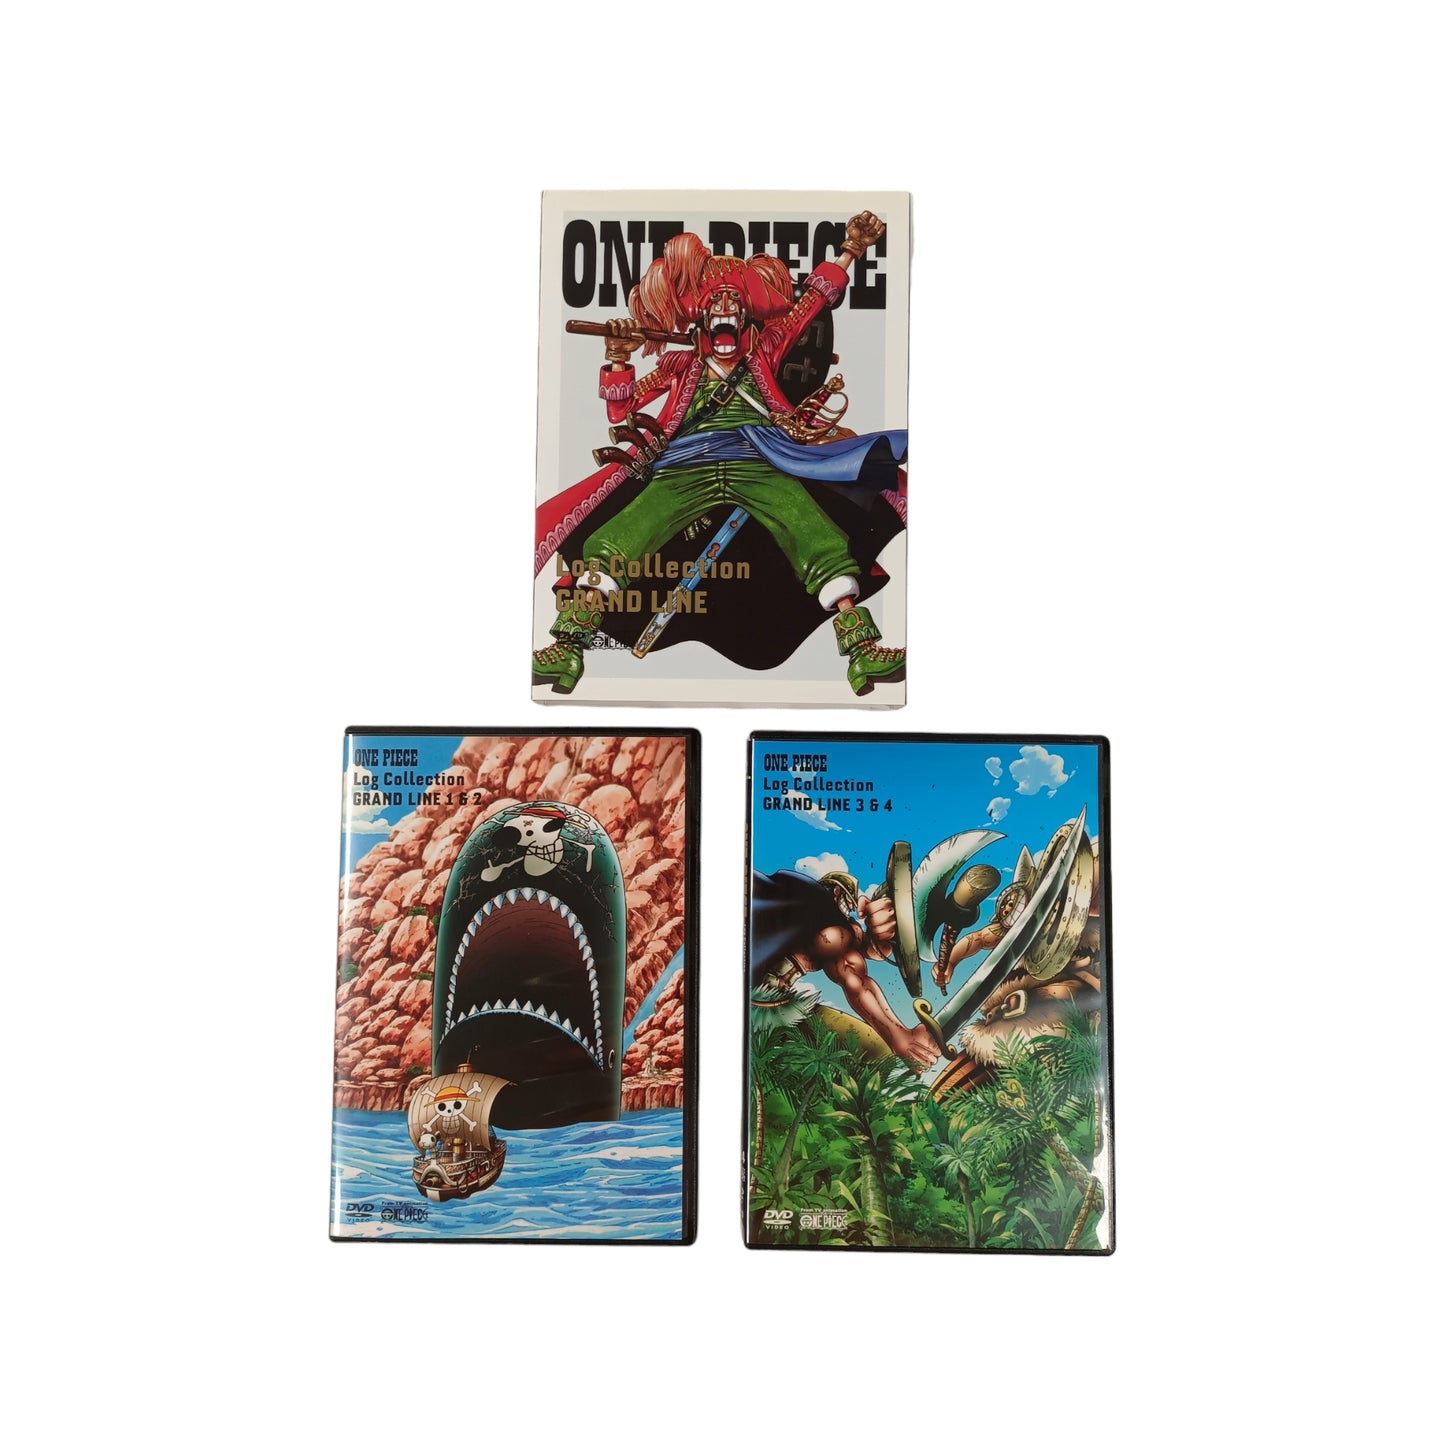 One Piece - Log Collection - Grand Line